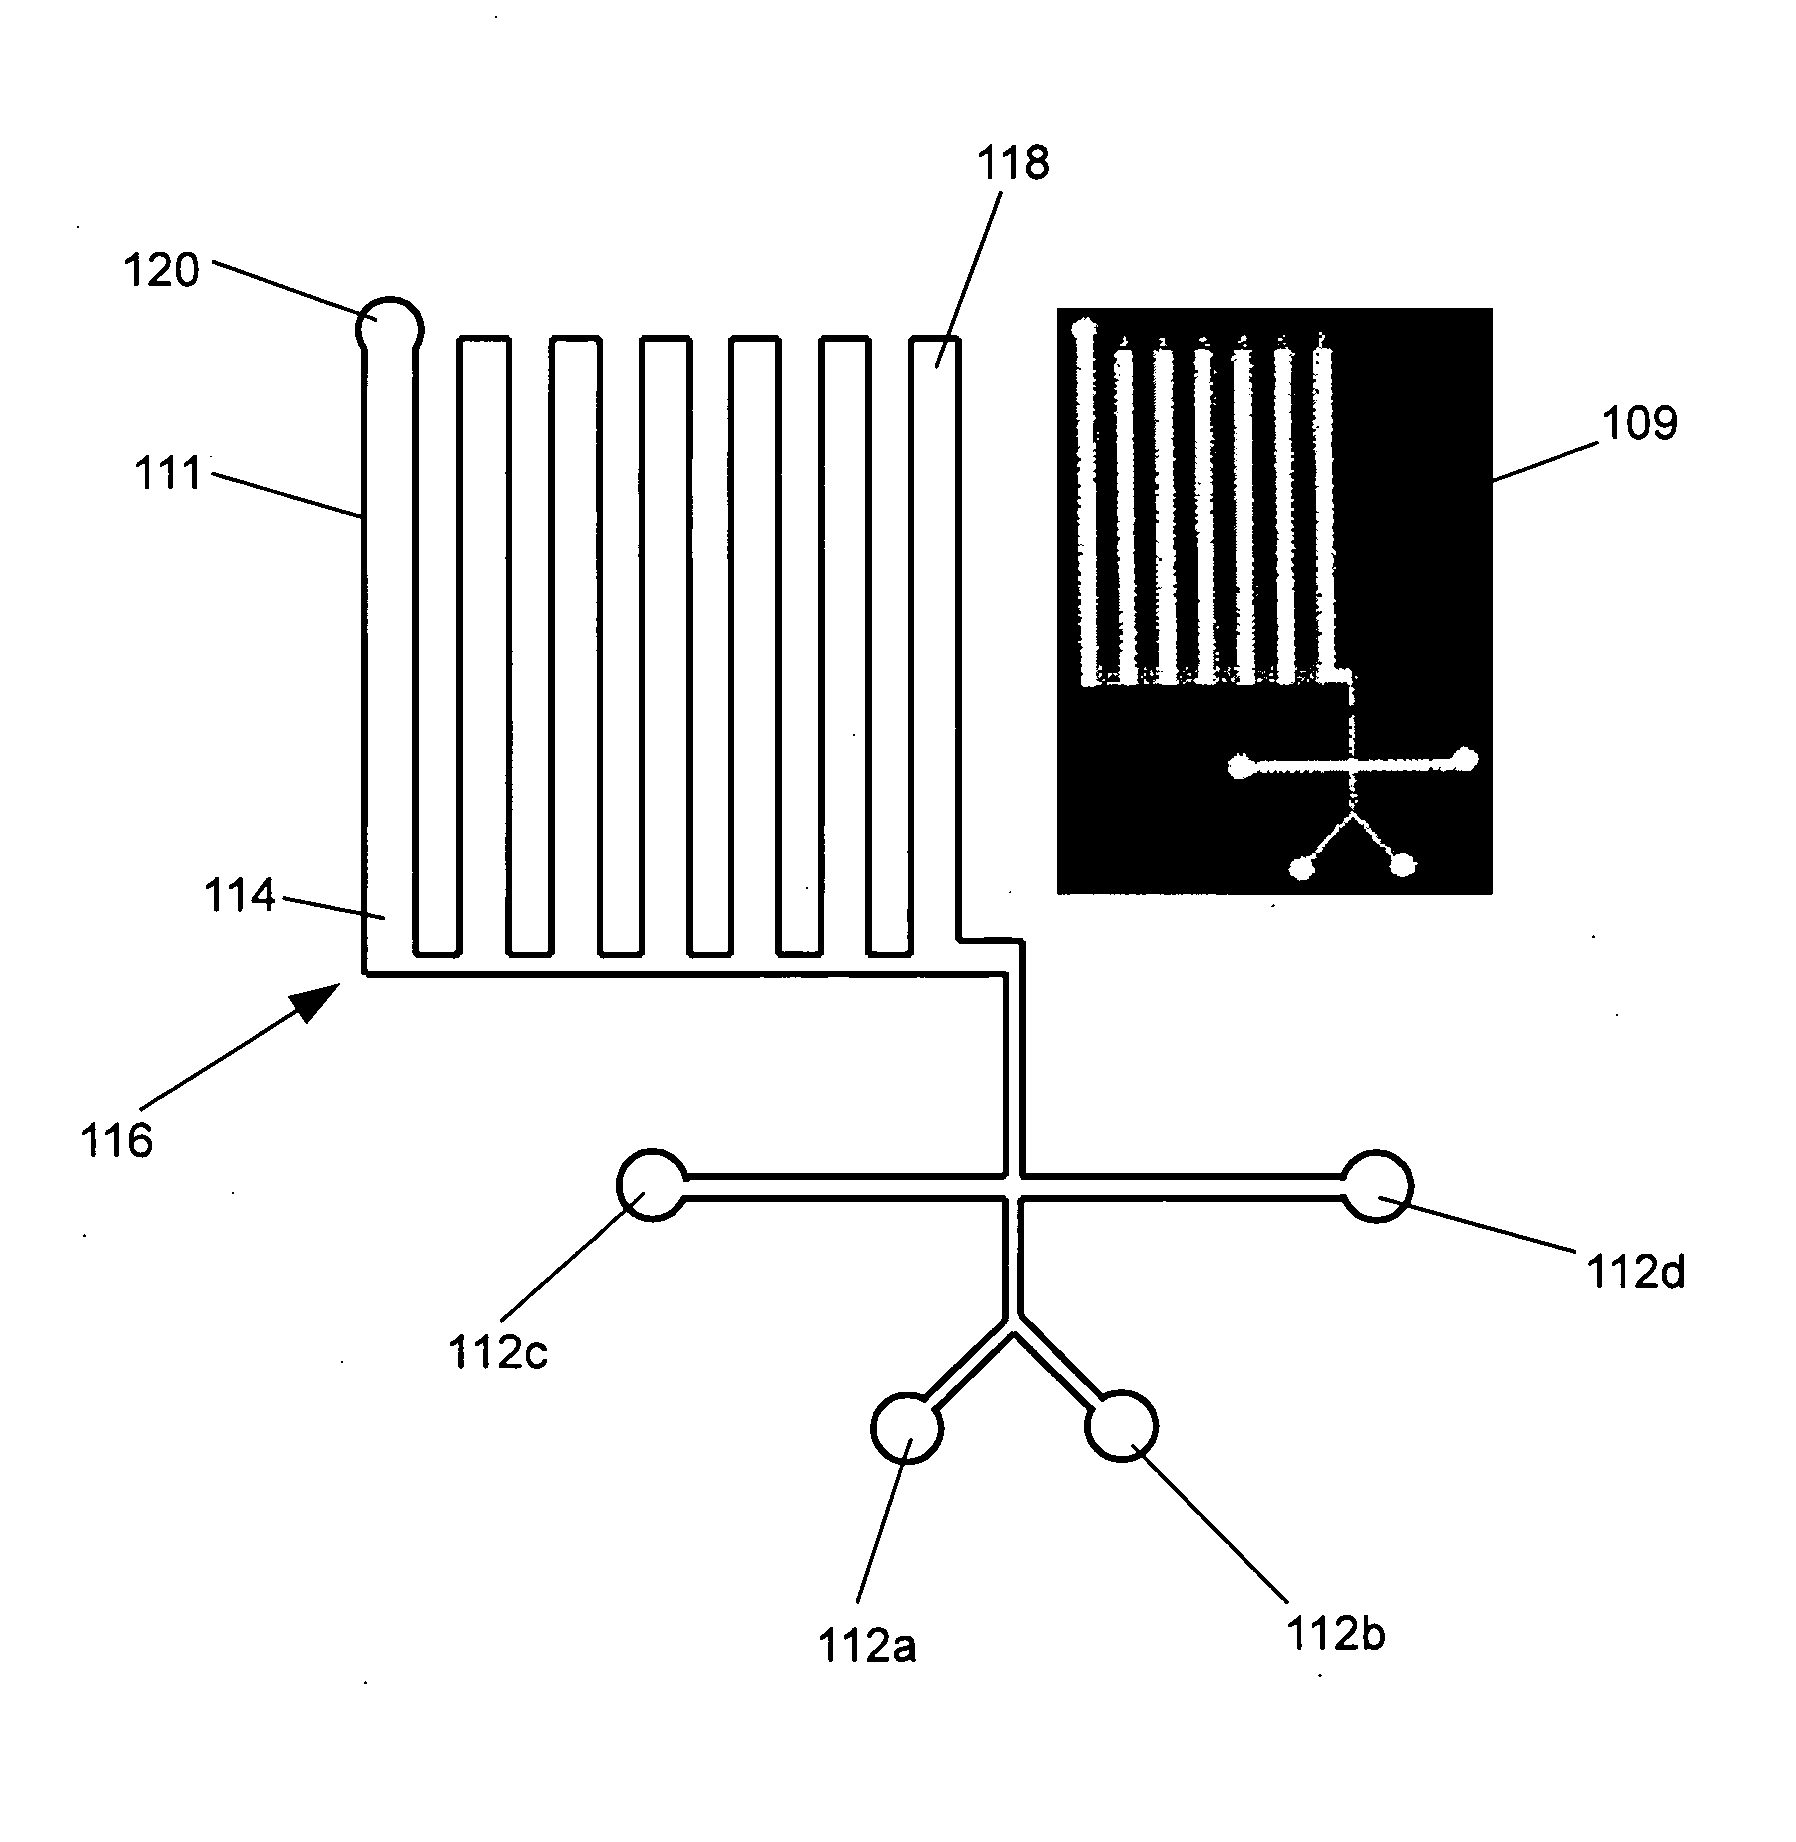 Microfluidic Device for Passive Sorting and Storage of Liquid Plugs Using Capillary Force